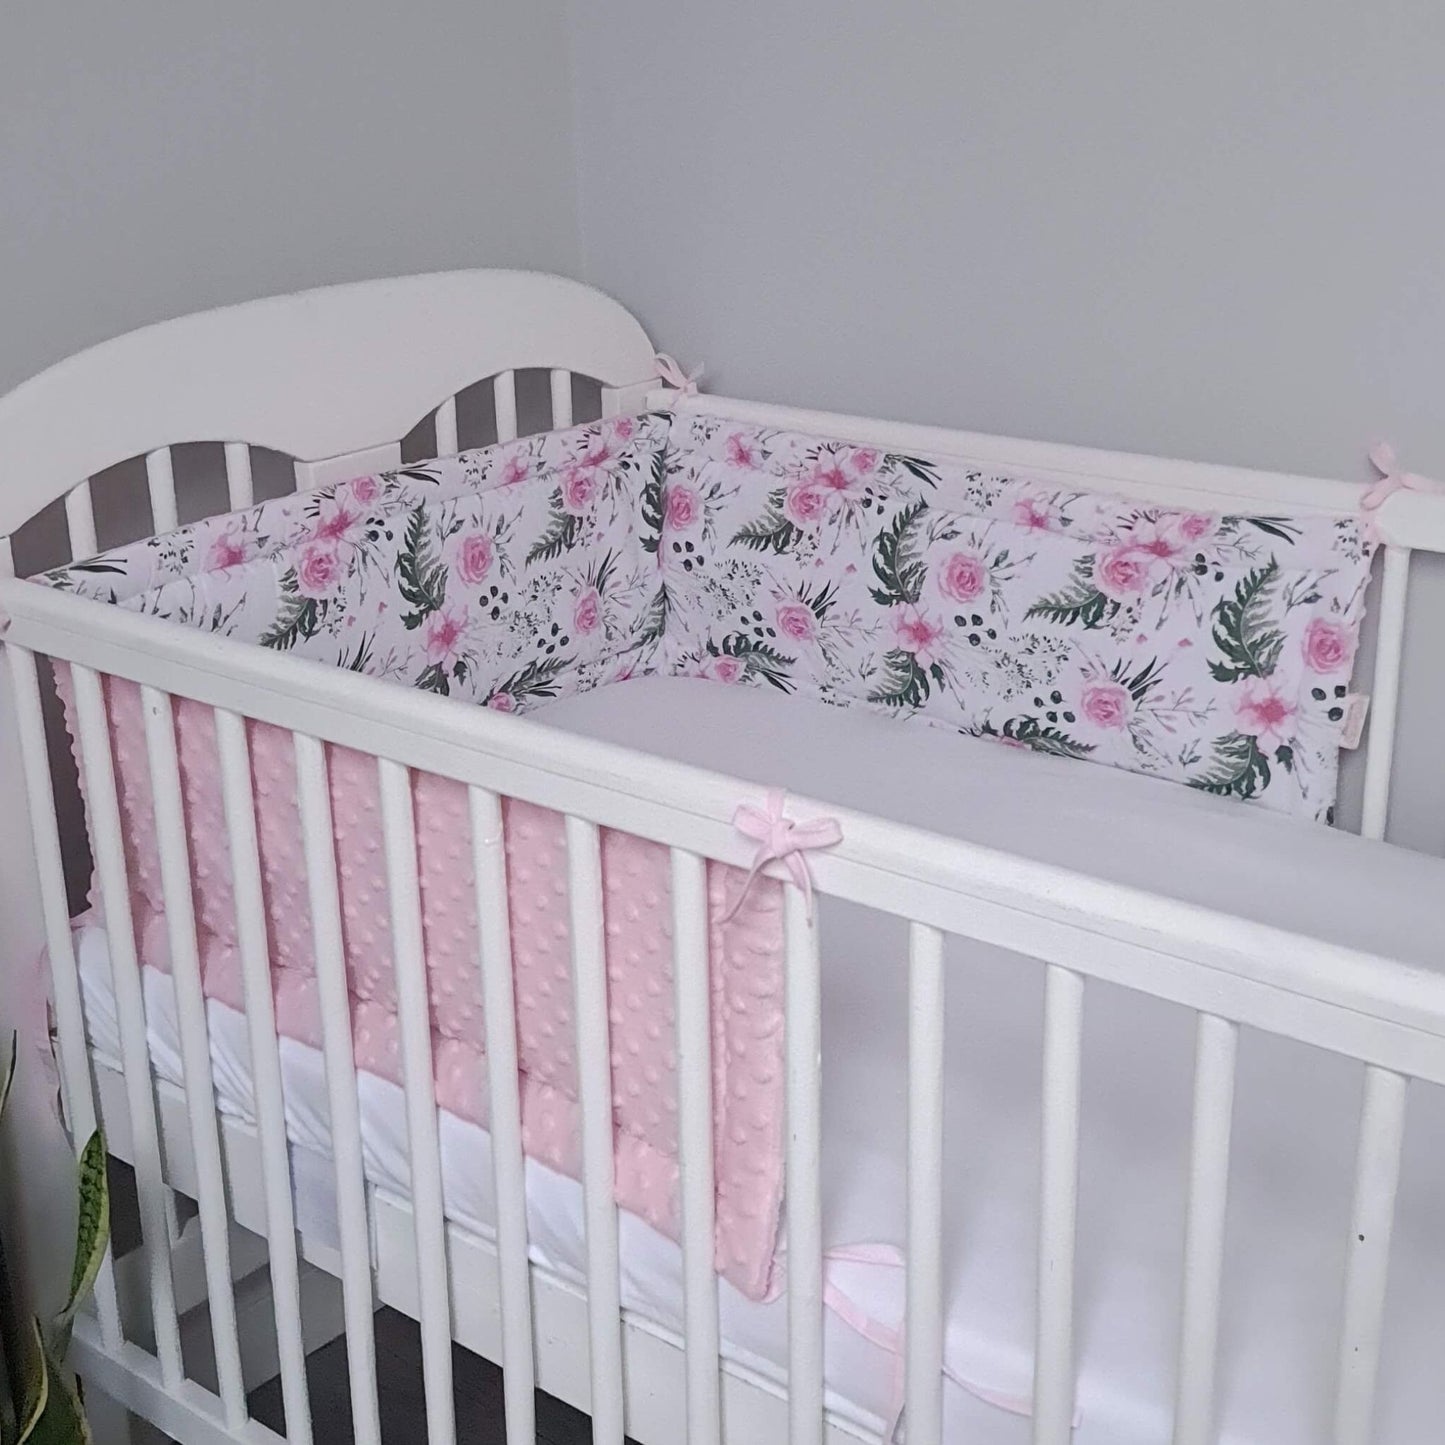 Cot and Cot bed Bumper Pink Roses